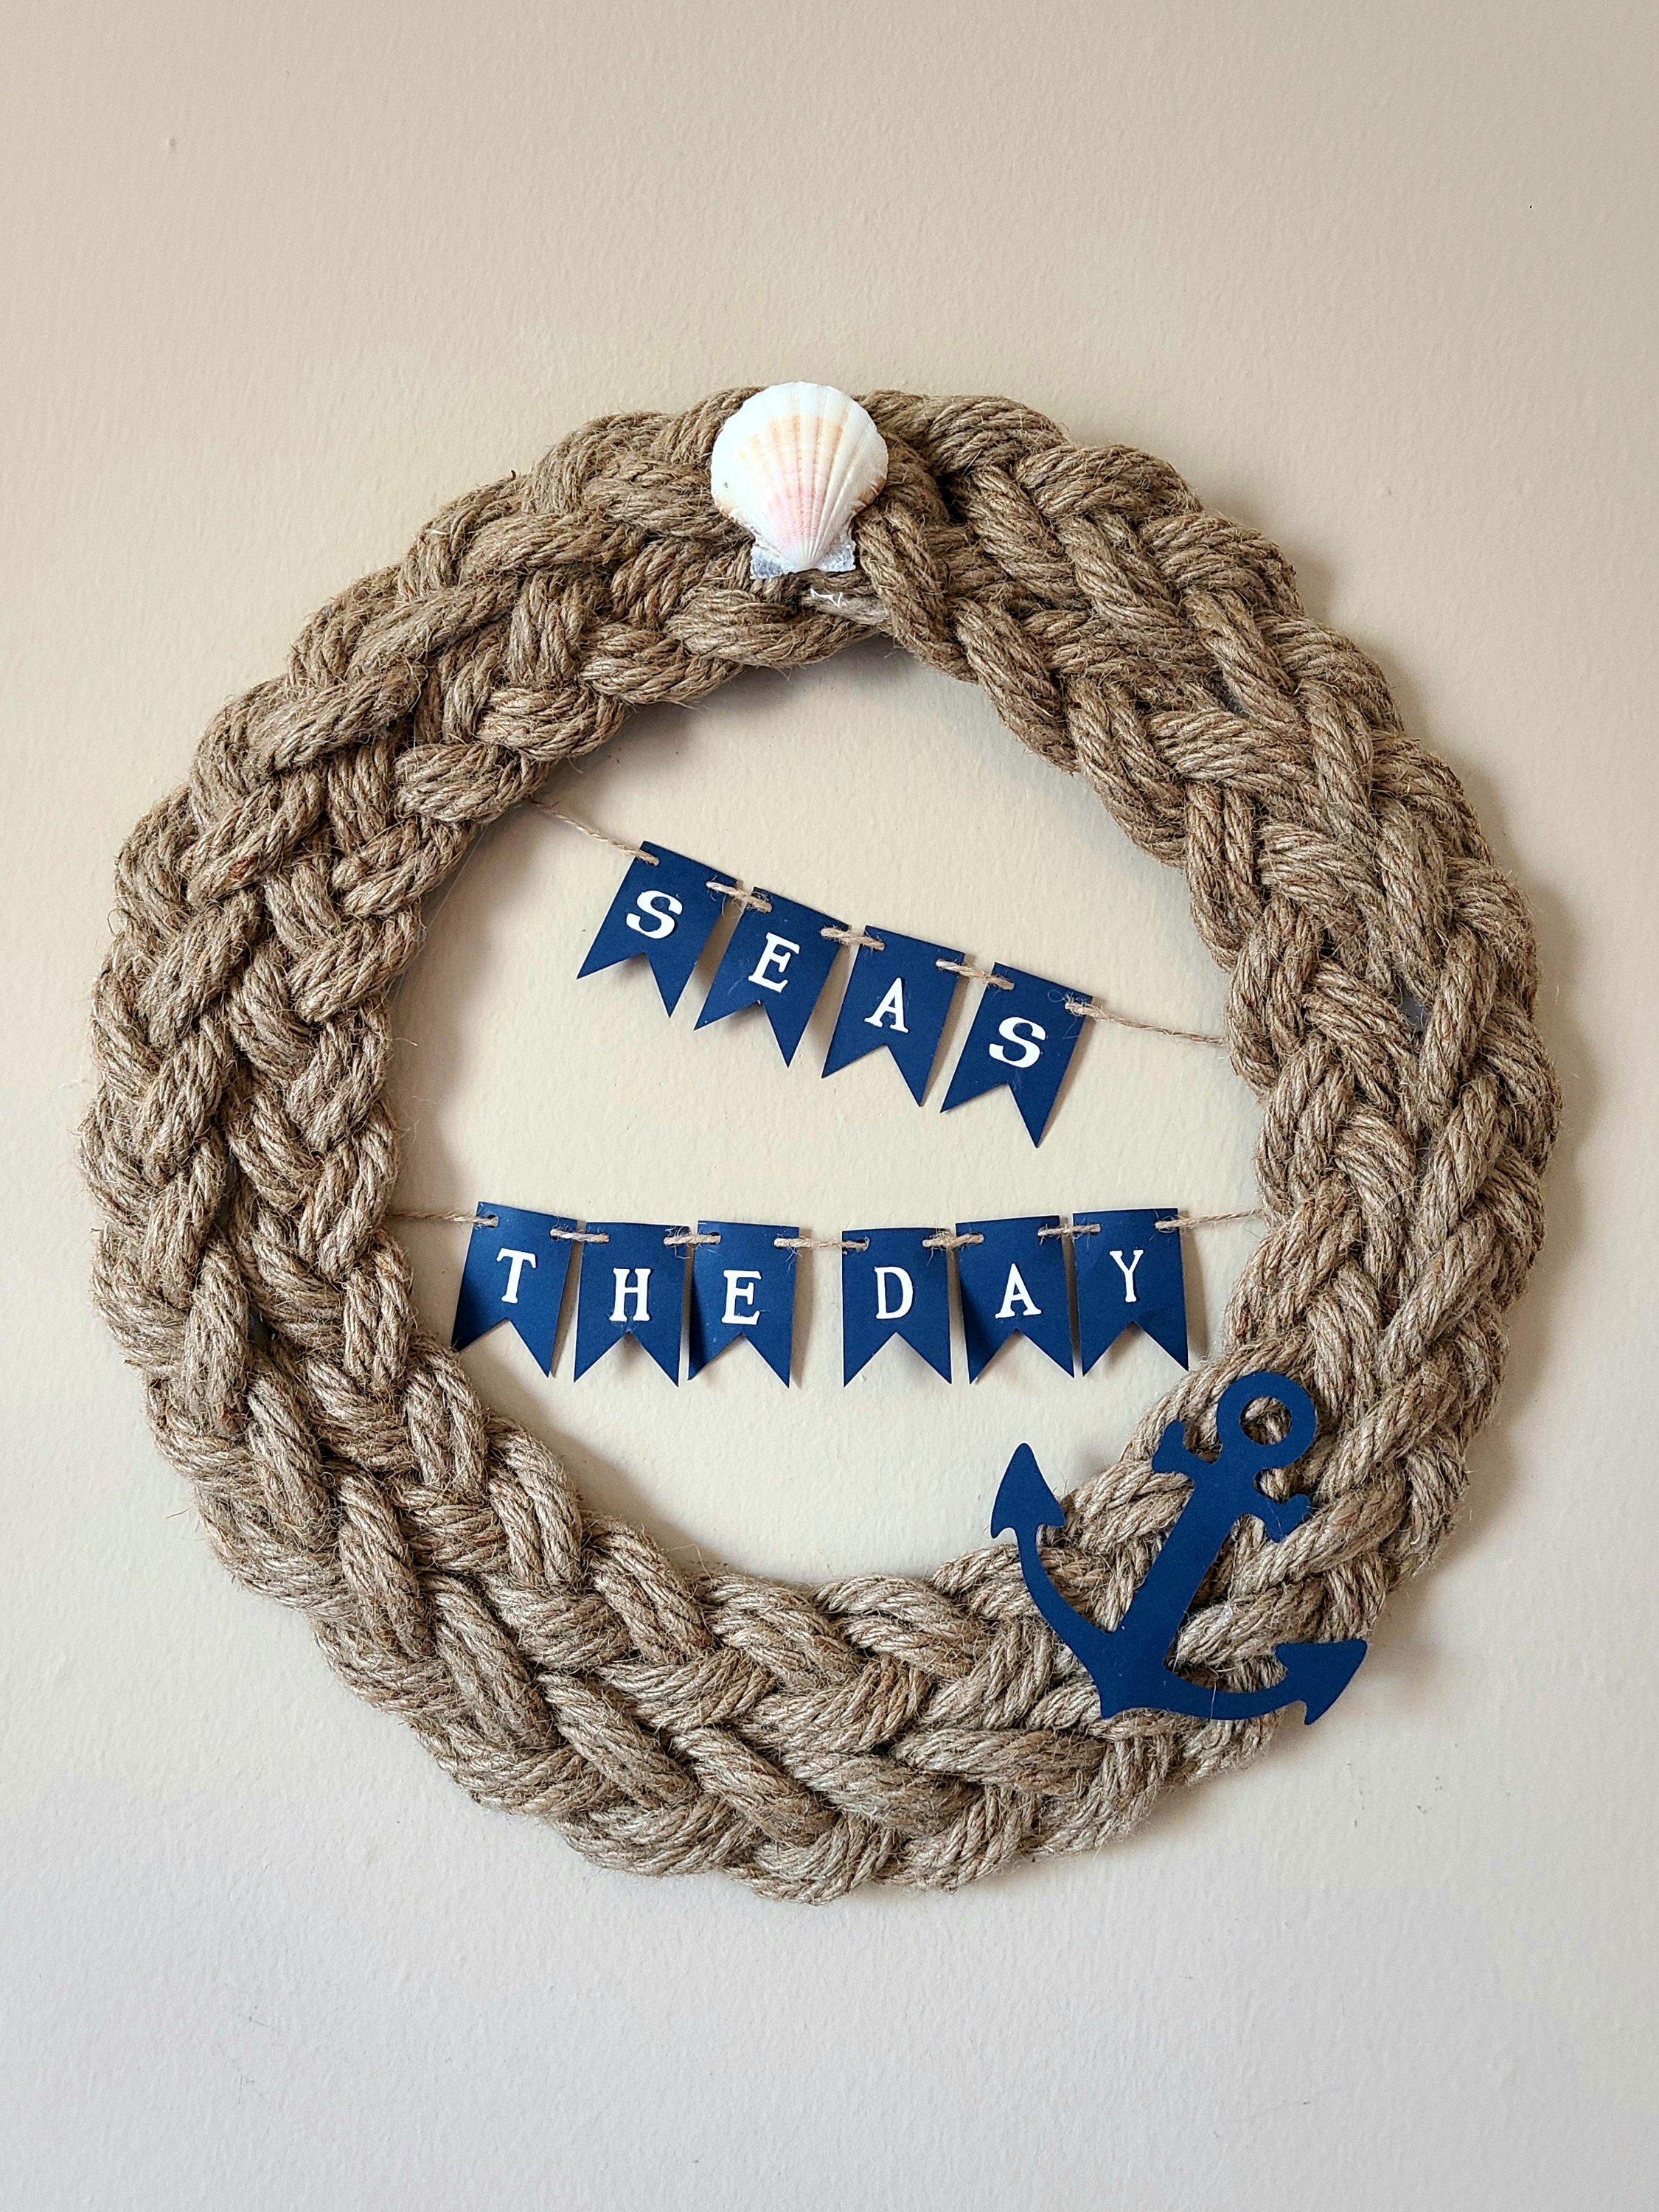 Completed nautical rope wreath: braided sisal rope glued to a DIY wreath form with a white seashell added to the top and a banner that reads, "seas the day," strung across the center, and a navy blue anchor shape glued to the wreath at about 5 o'clock.